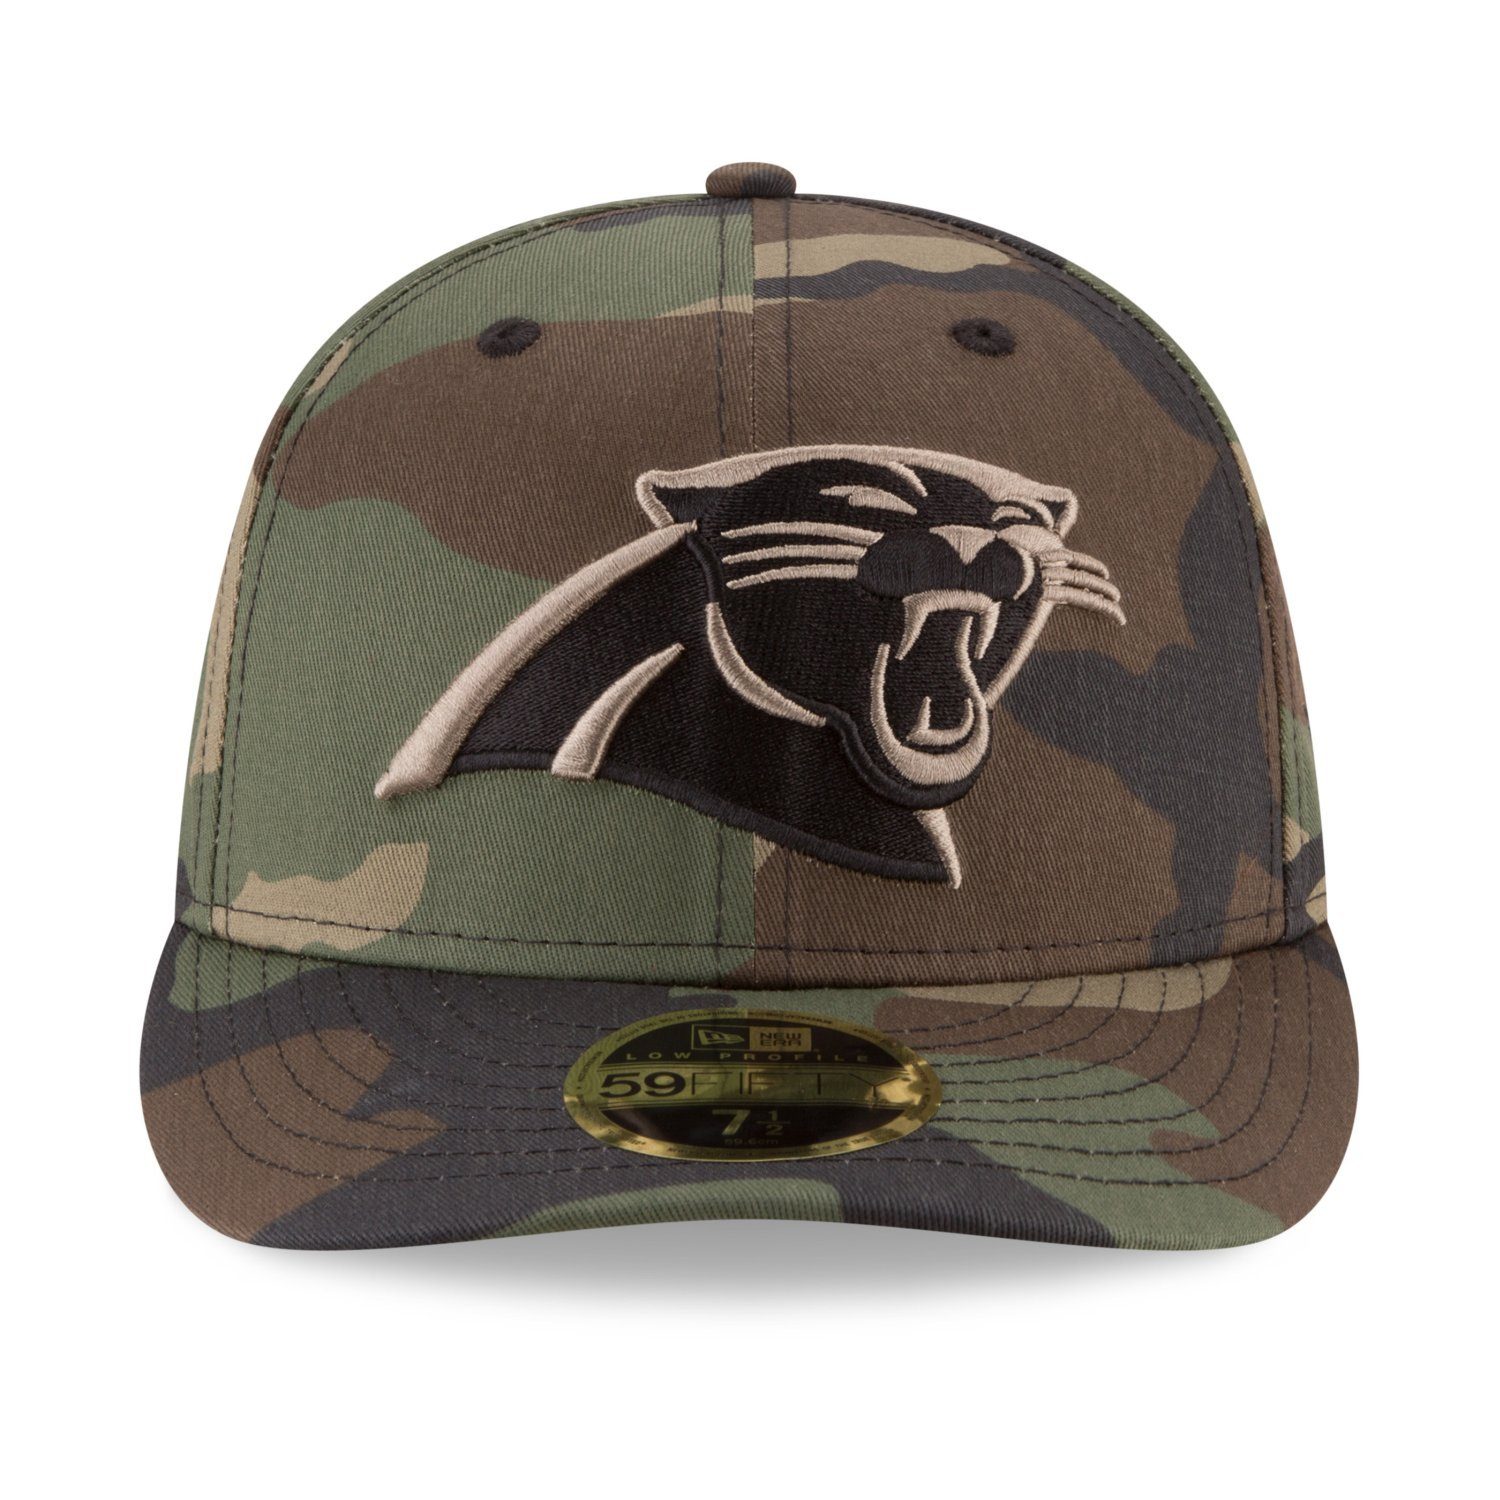 New Era Fitted Cap Low NFL Panthers Carolina woodland Profile Teams 59Fifty